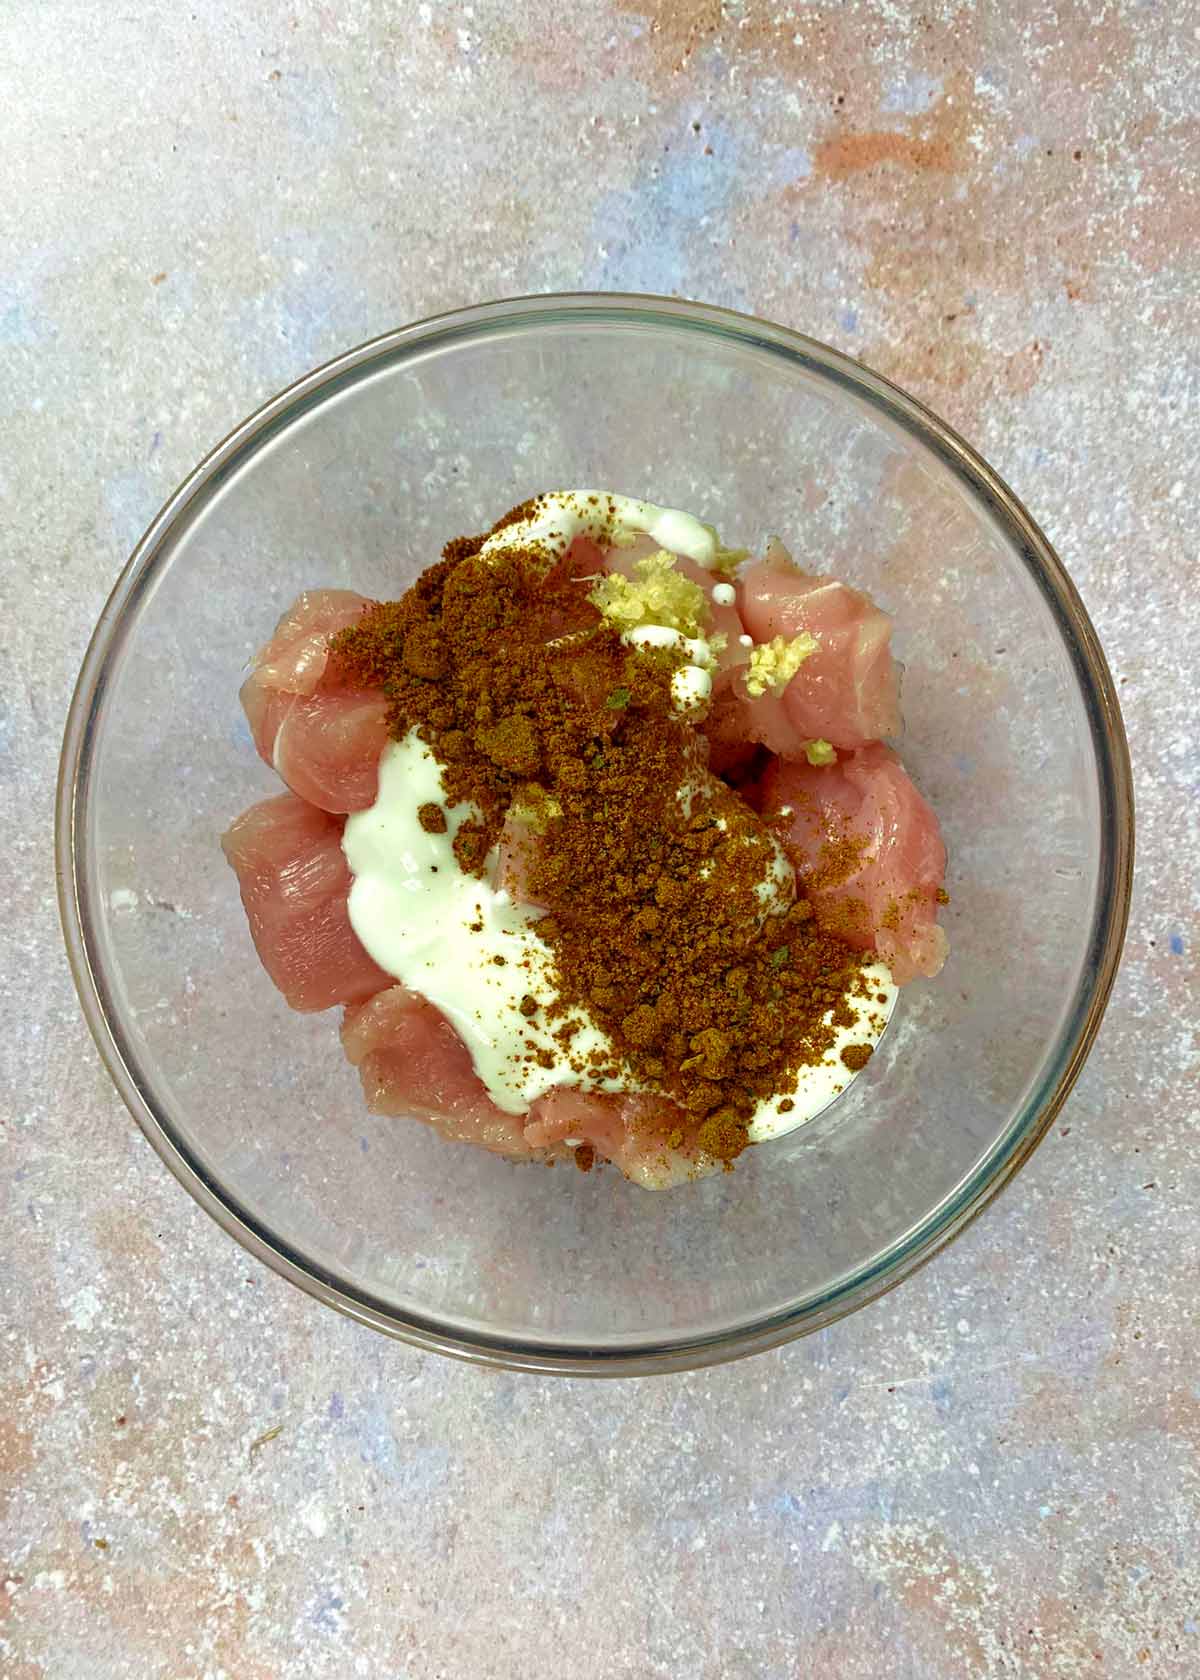 A glass bowl containing chunks of chicken, yogurt and a spice blend.